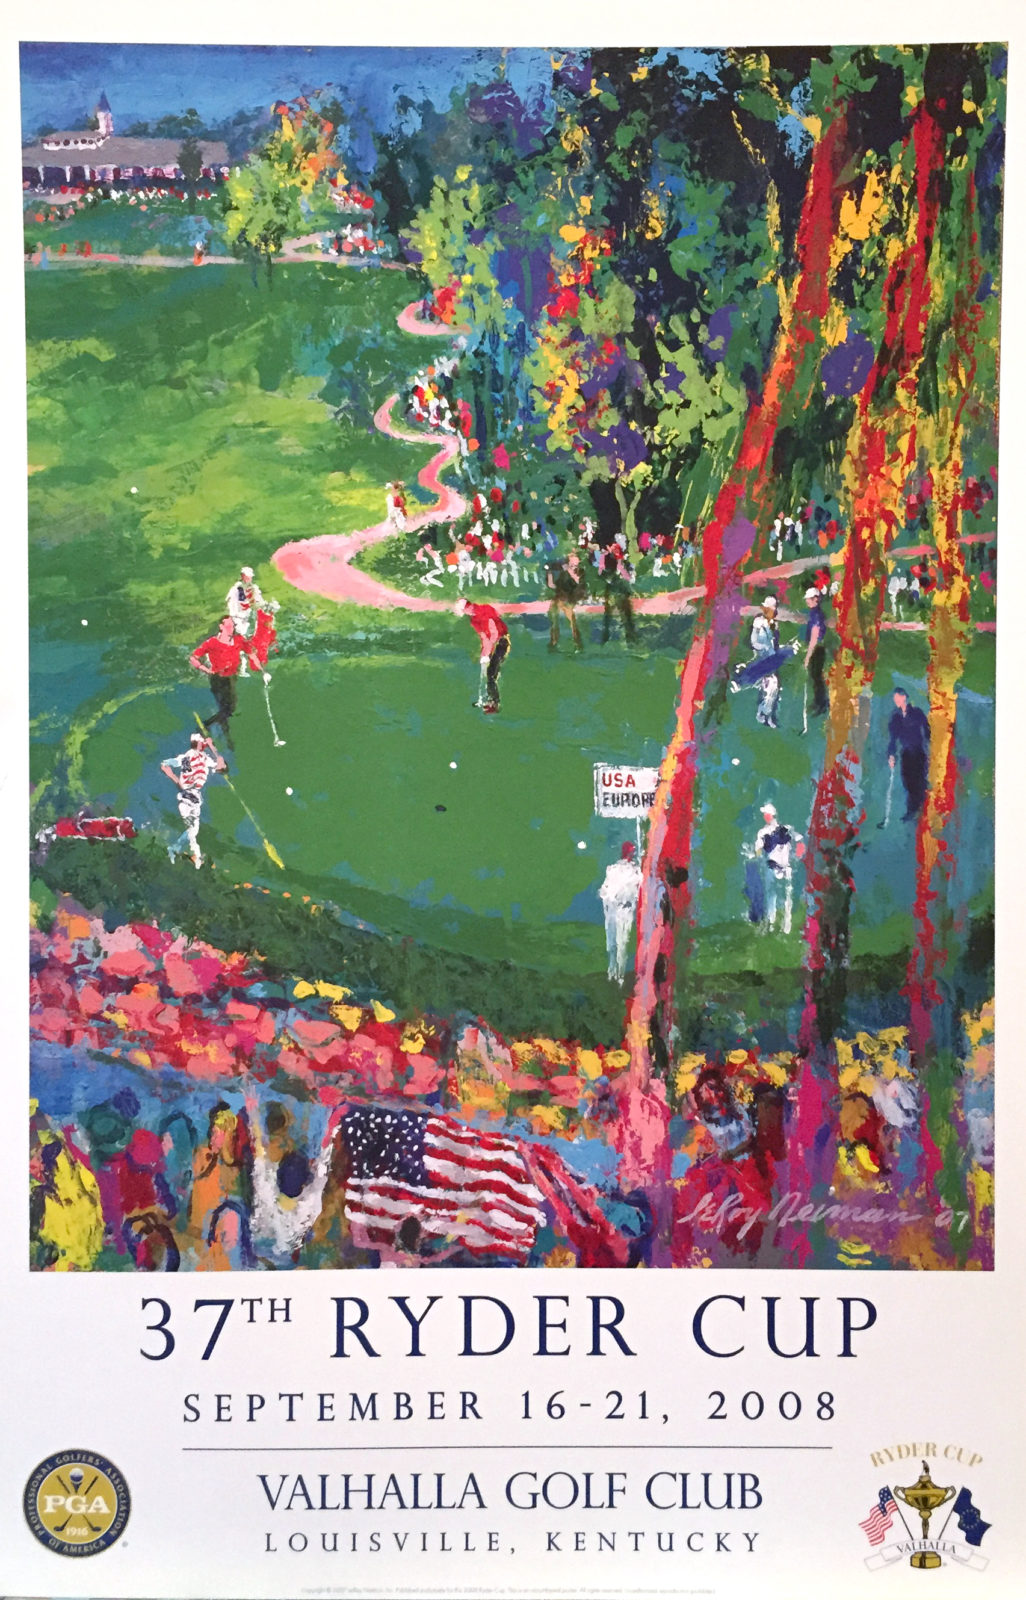 37th Ryder Cup poster